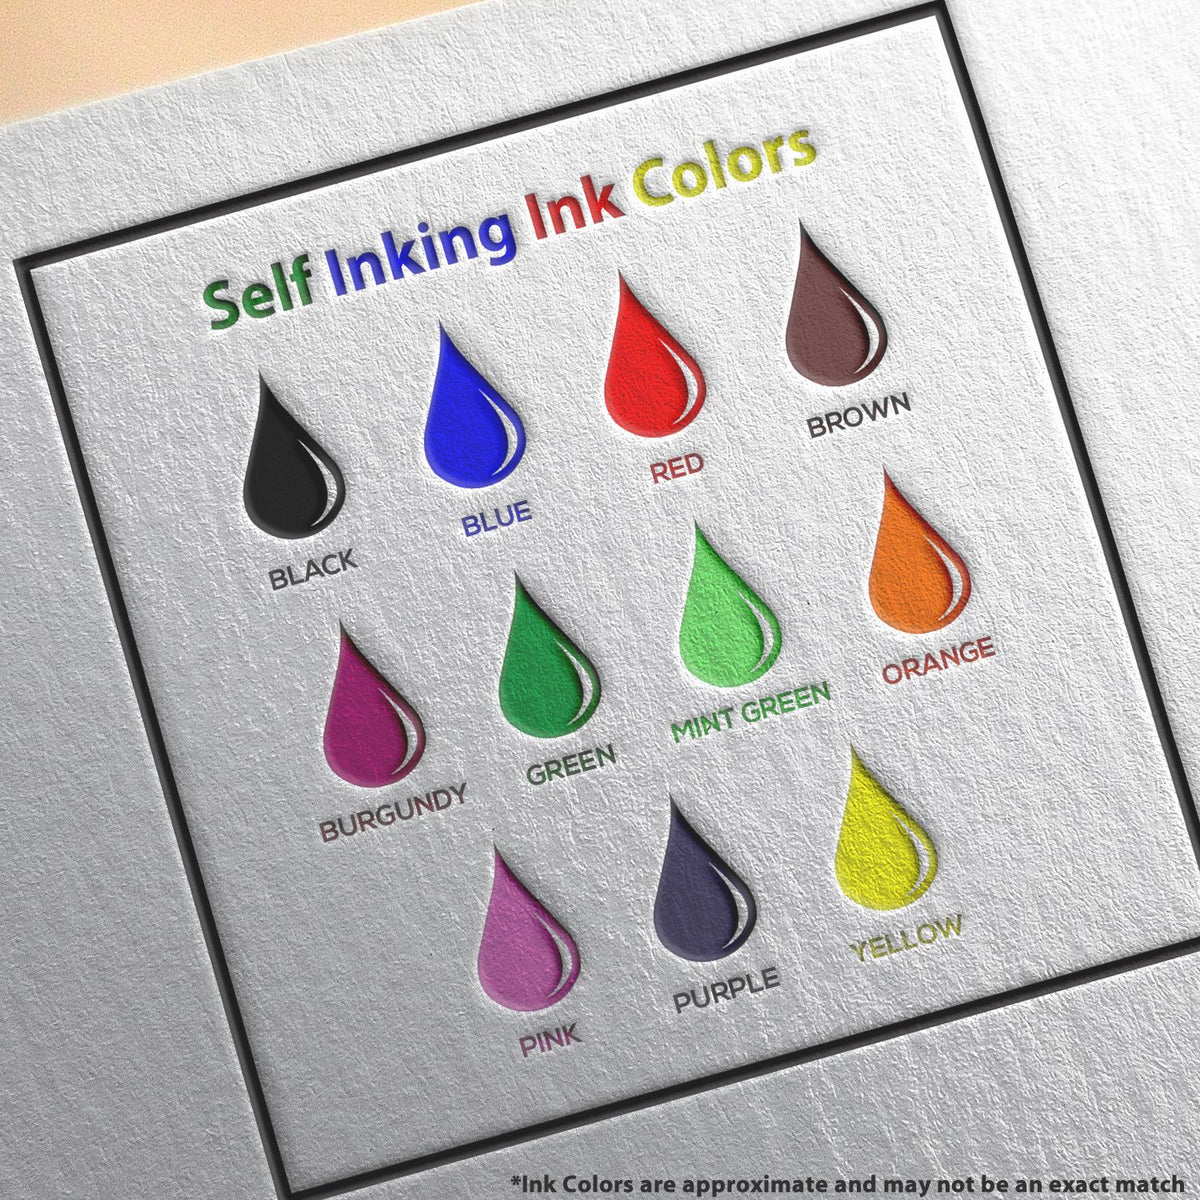 A picture showing the different ink colors or hues available for the Self-Inking Kentucky PE Stamp product.